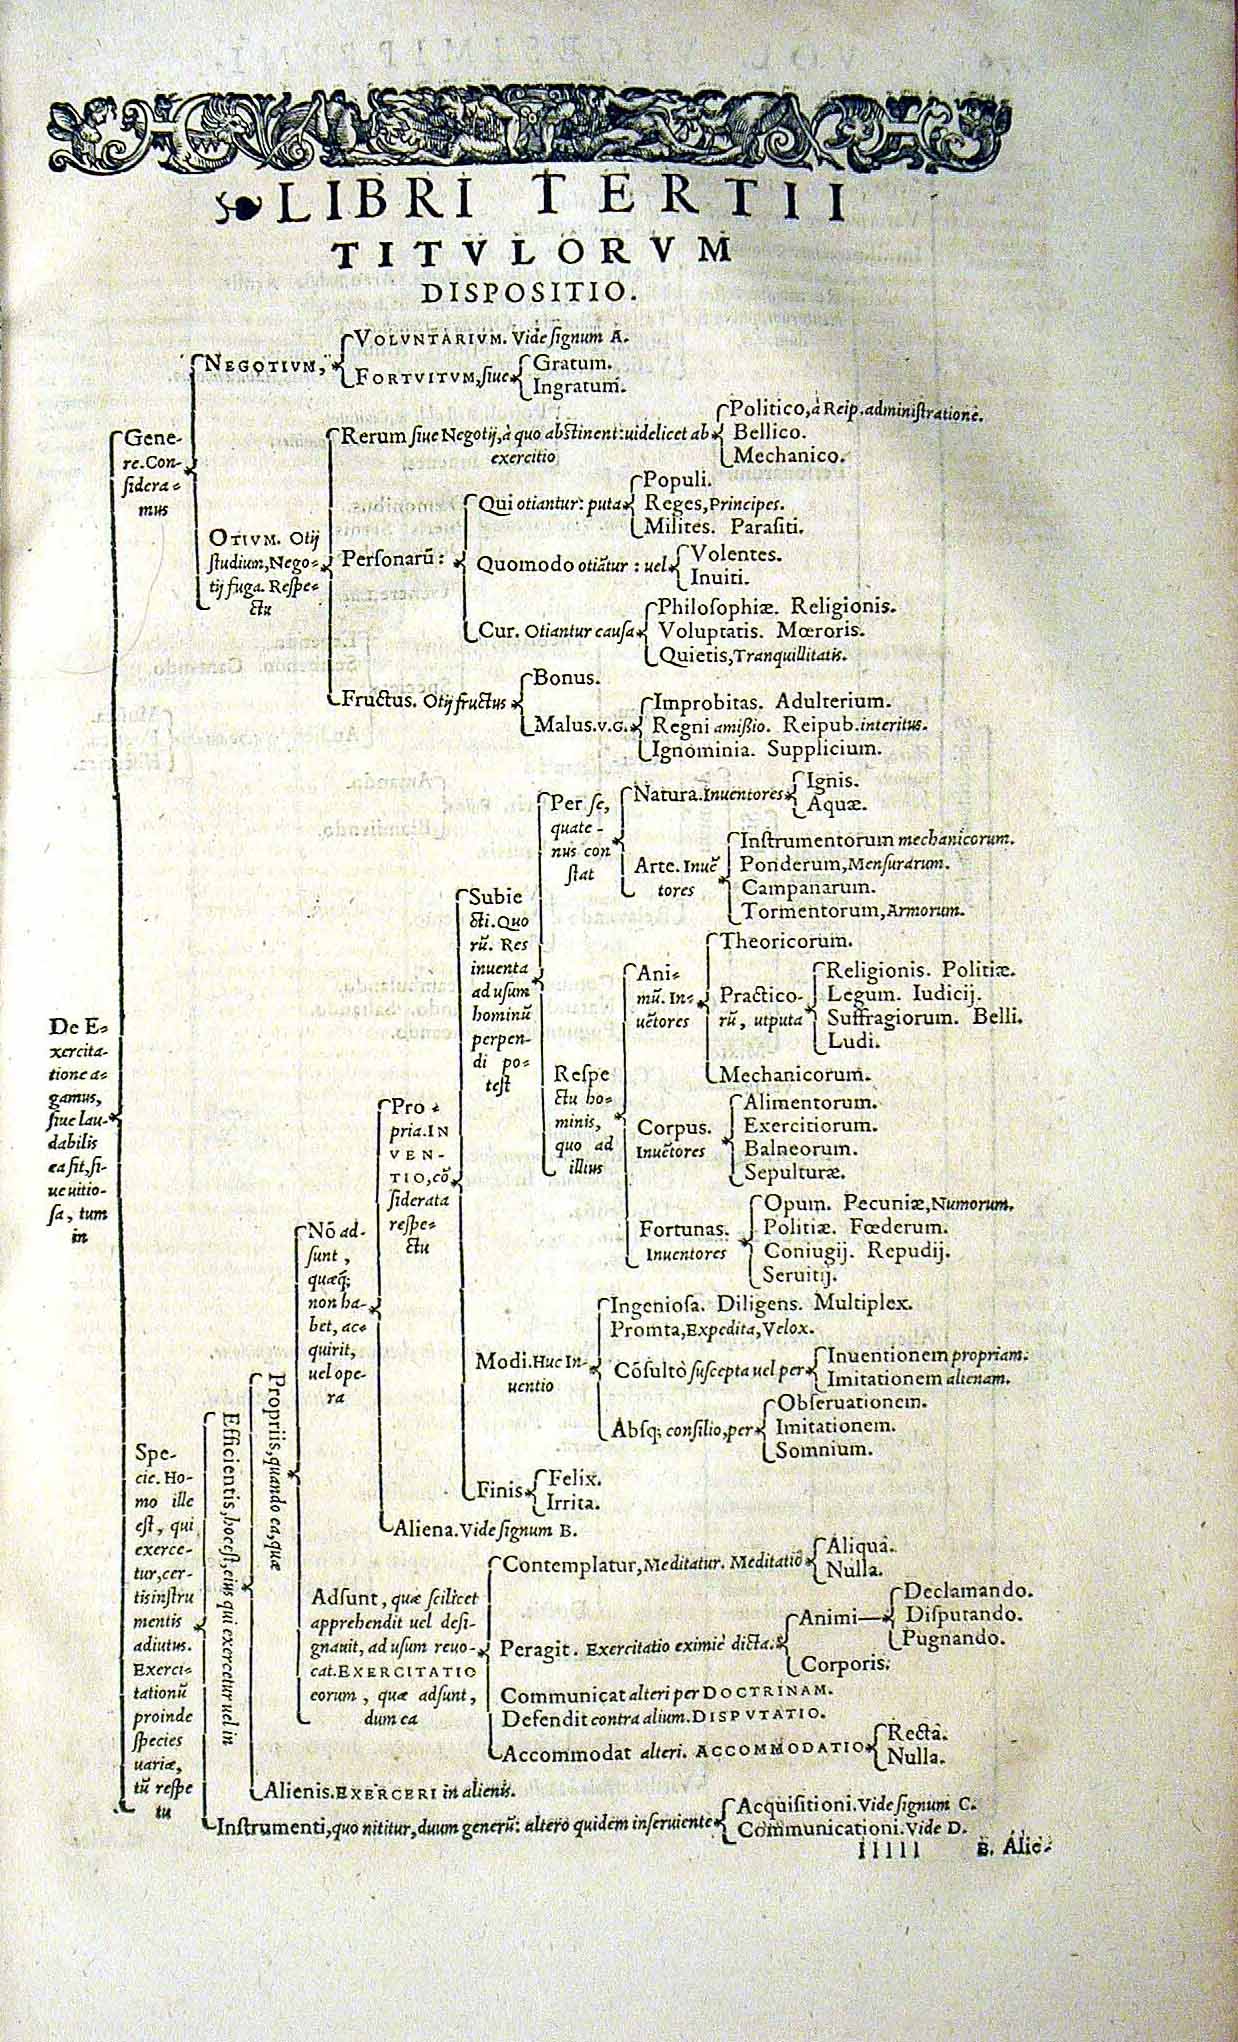 The taxonomy for Zwinger's sixteenth century encyclopedia. [via]